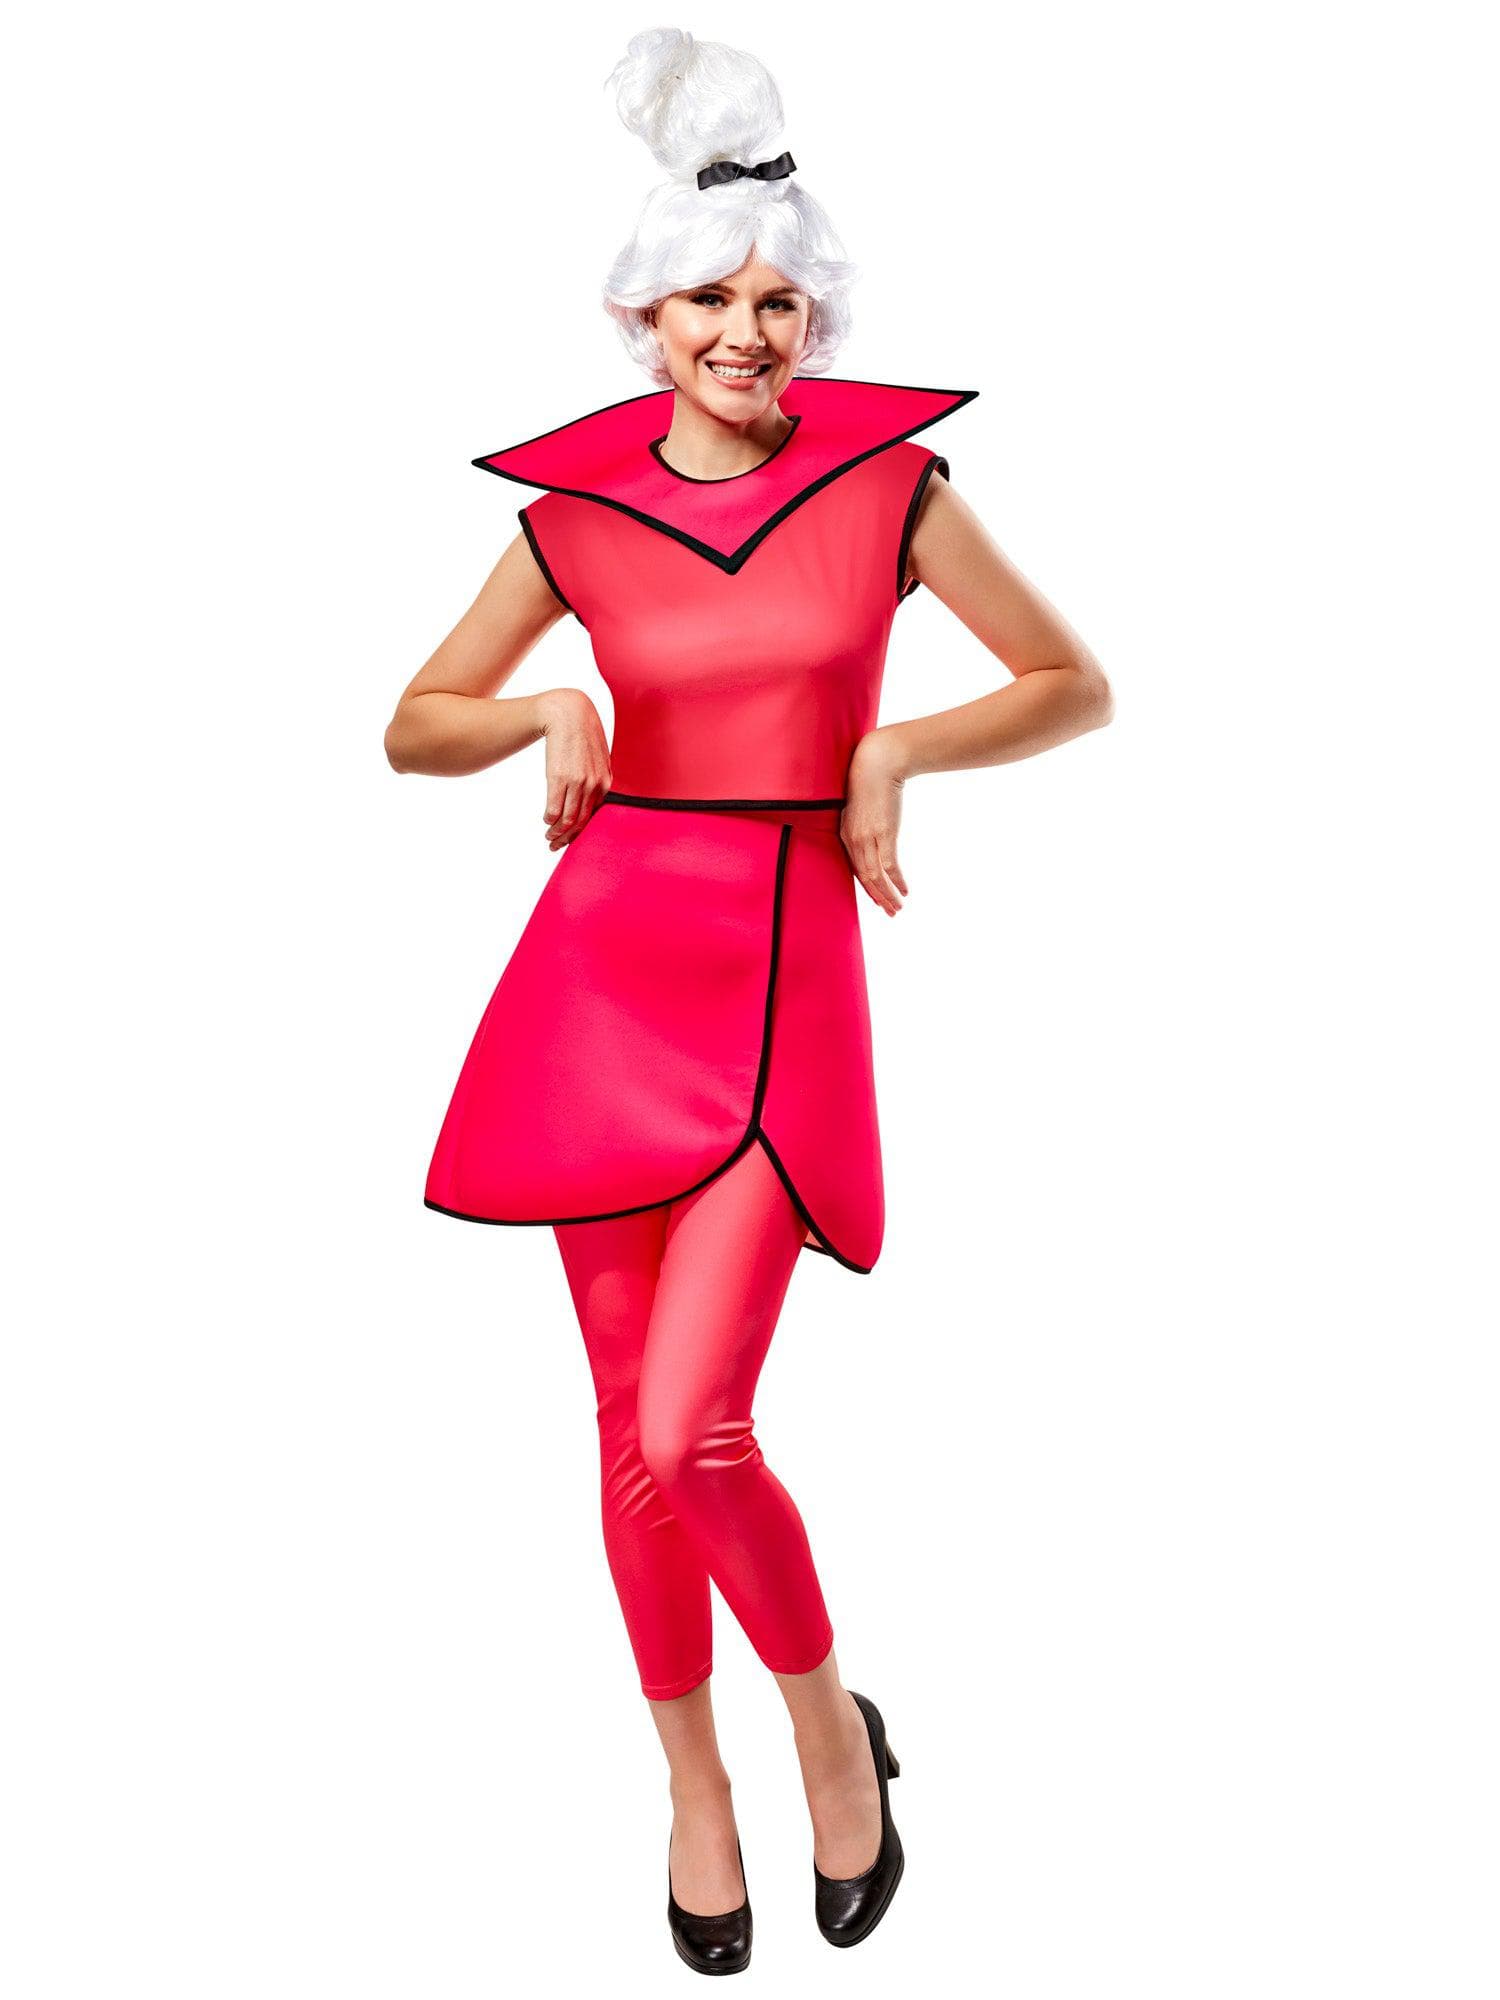 The Jetsons Judy Jetson Adult Costume - costumes.com